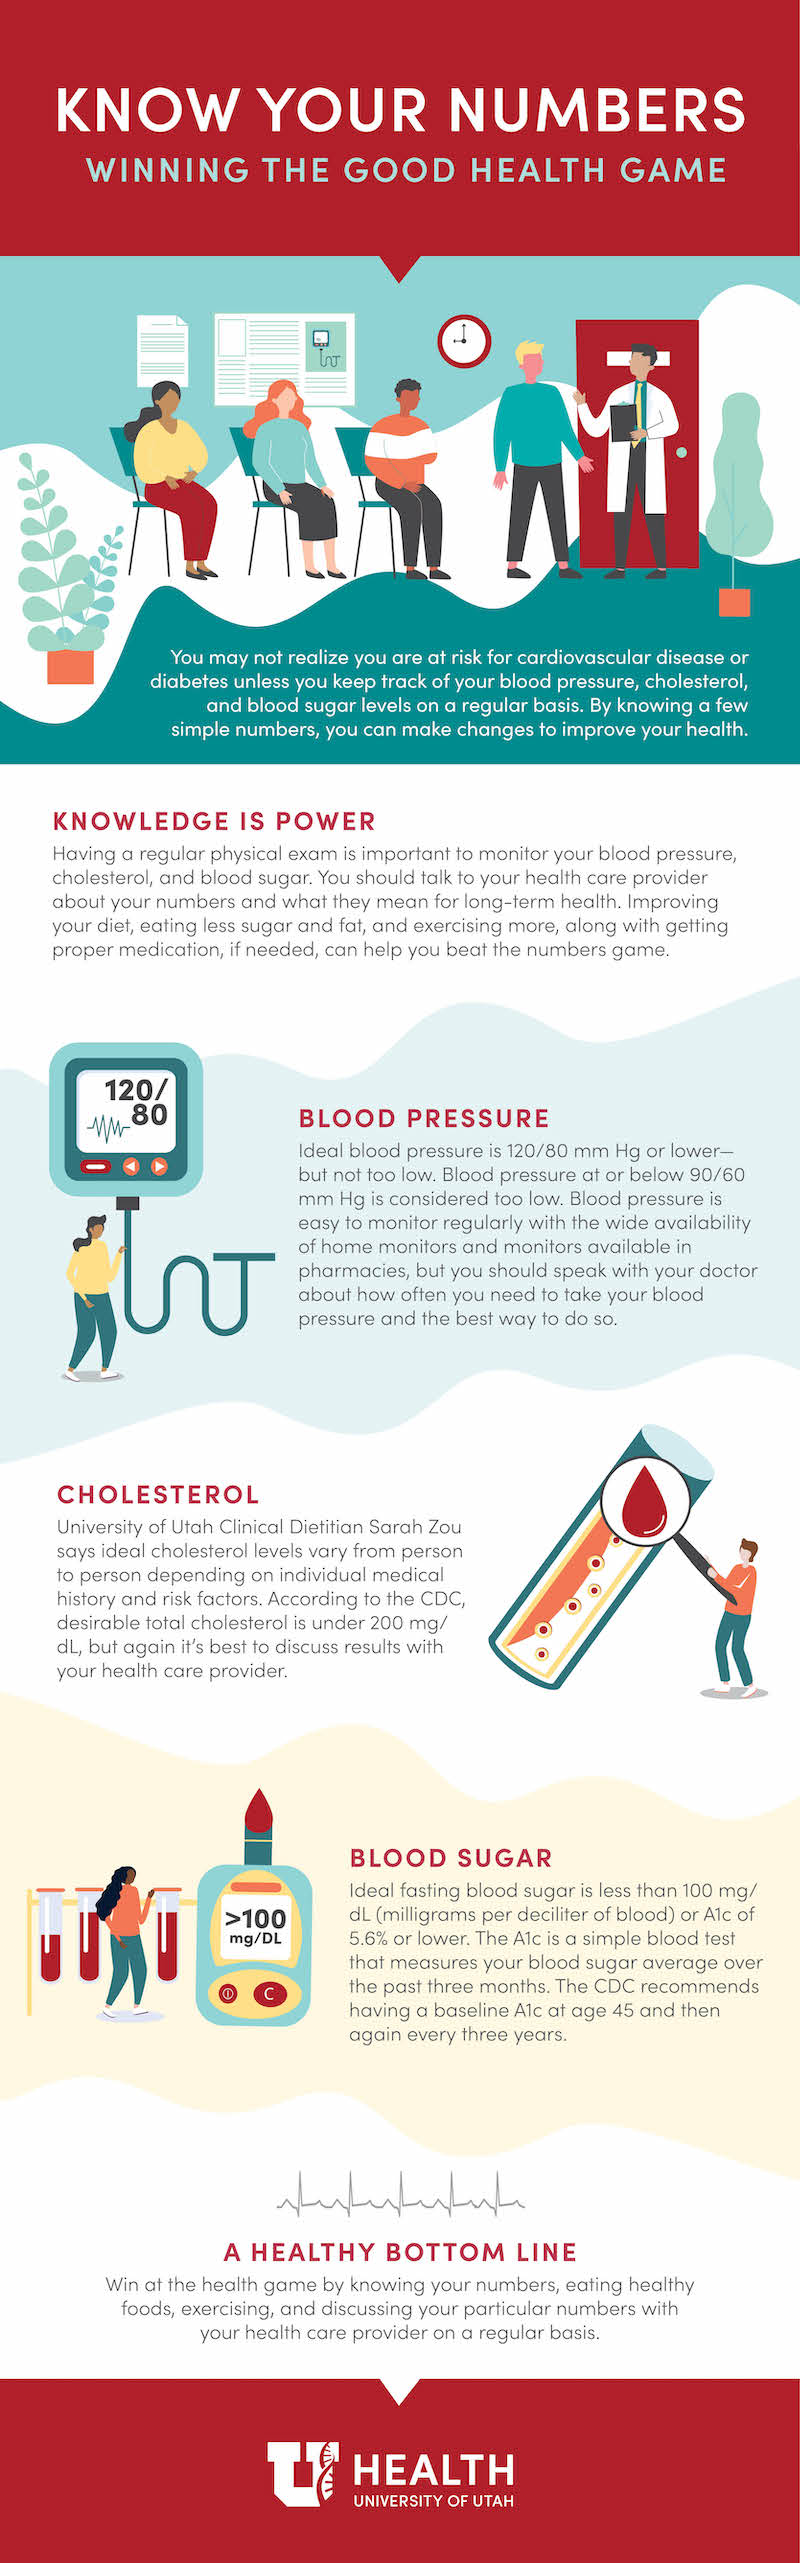 Infographic explains how to keep track of your blood pressure, cholesterol, and blood sugar levels.